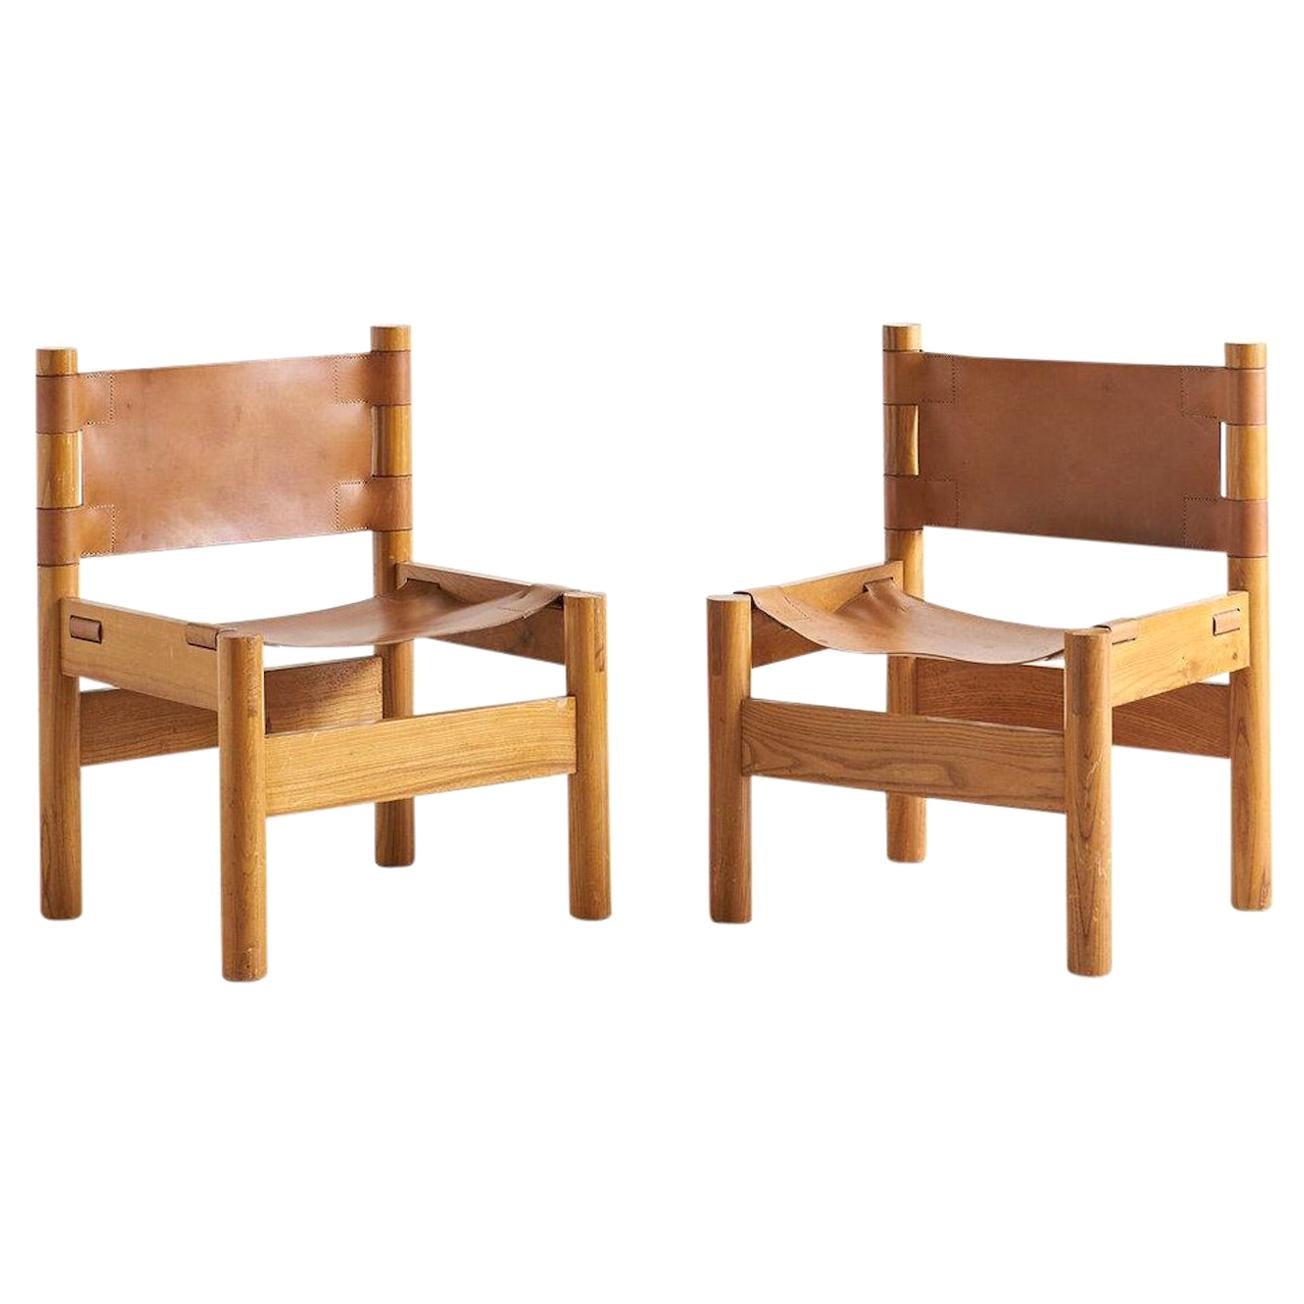 Pair of French Elm Wood and Saddle Leather Lounge Chairs